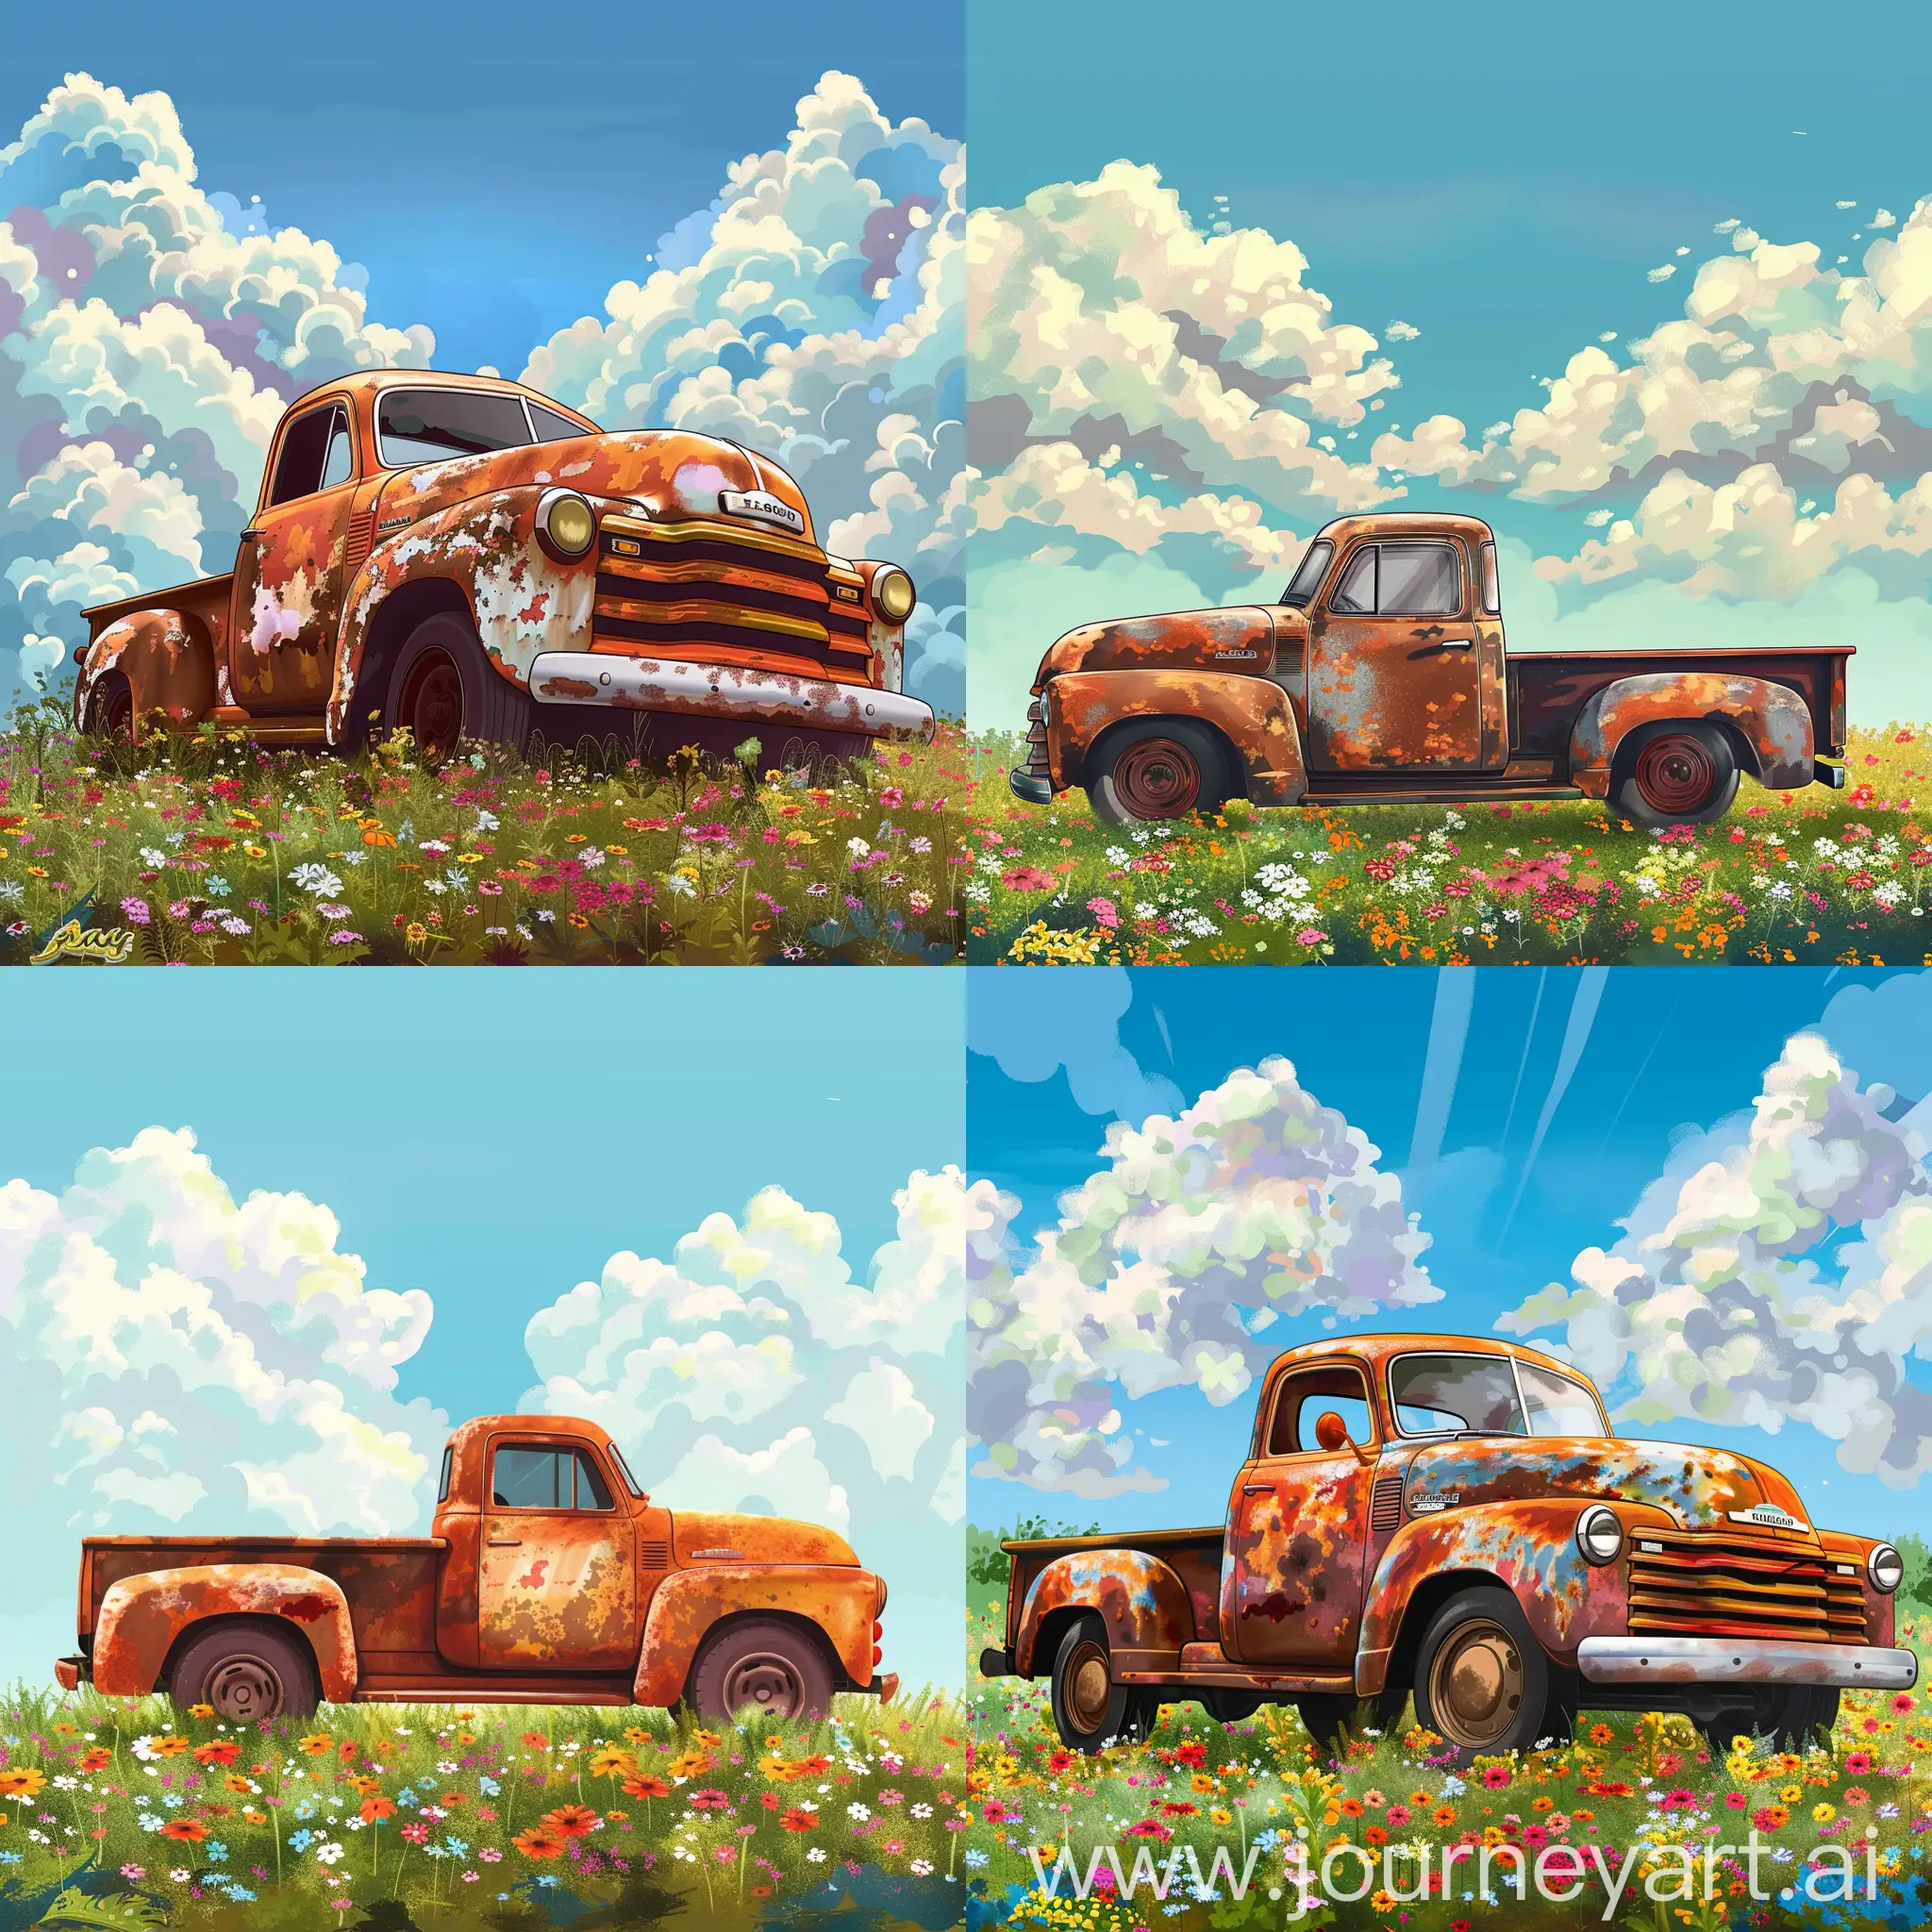 Vintage-Pickup-Truck-Surrounded-by-Flower-Field-Under-Sunny-Sky